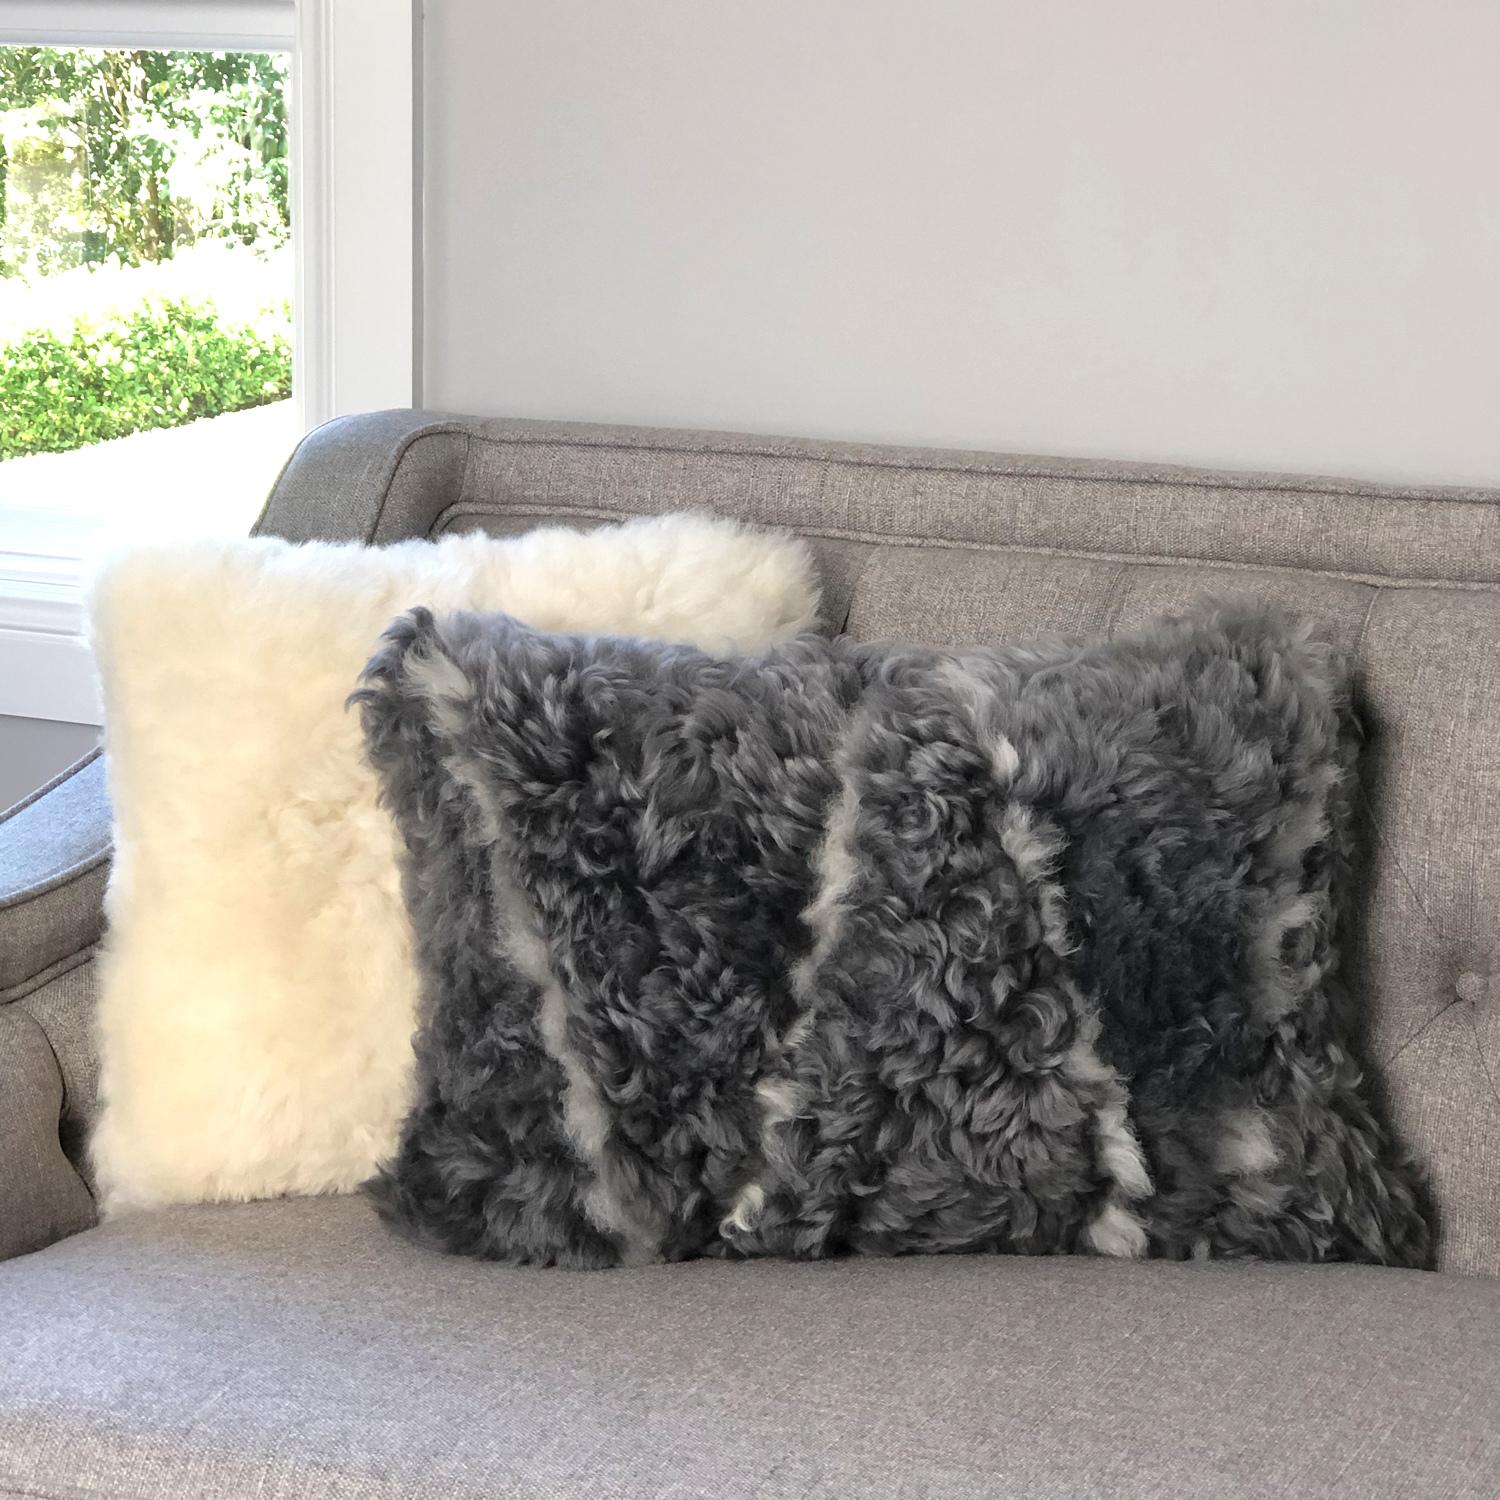 Add comforting and luxe textures to your decor with this plush grey and white sheepskin pillow. Made from the finest eco-friendly sheepskins, guaranteed to not have been processed through harsh and toxic chemicals. Our eco choice Icelandic